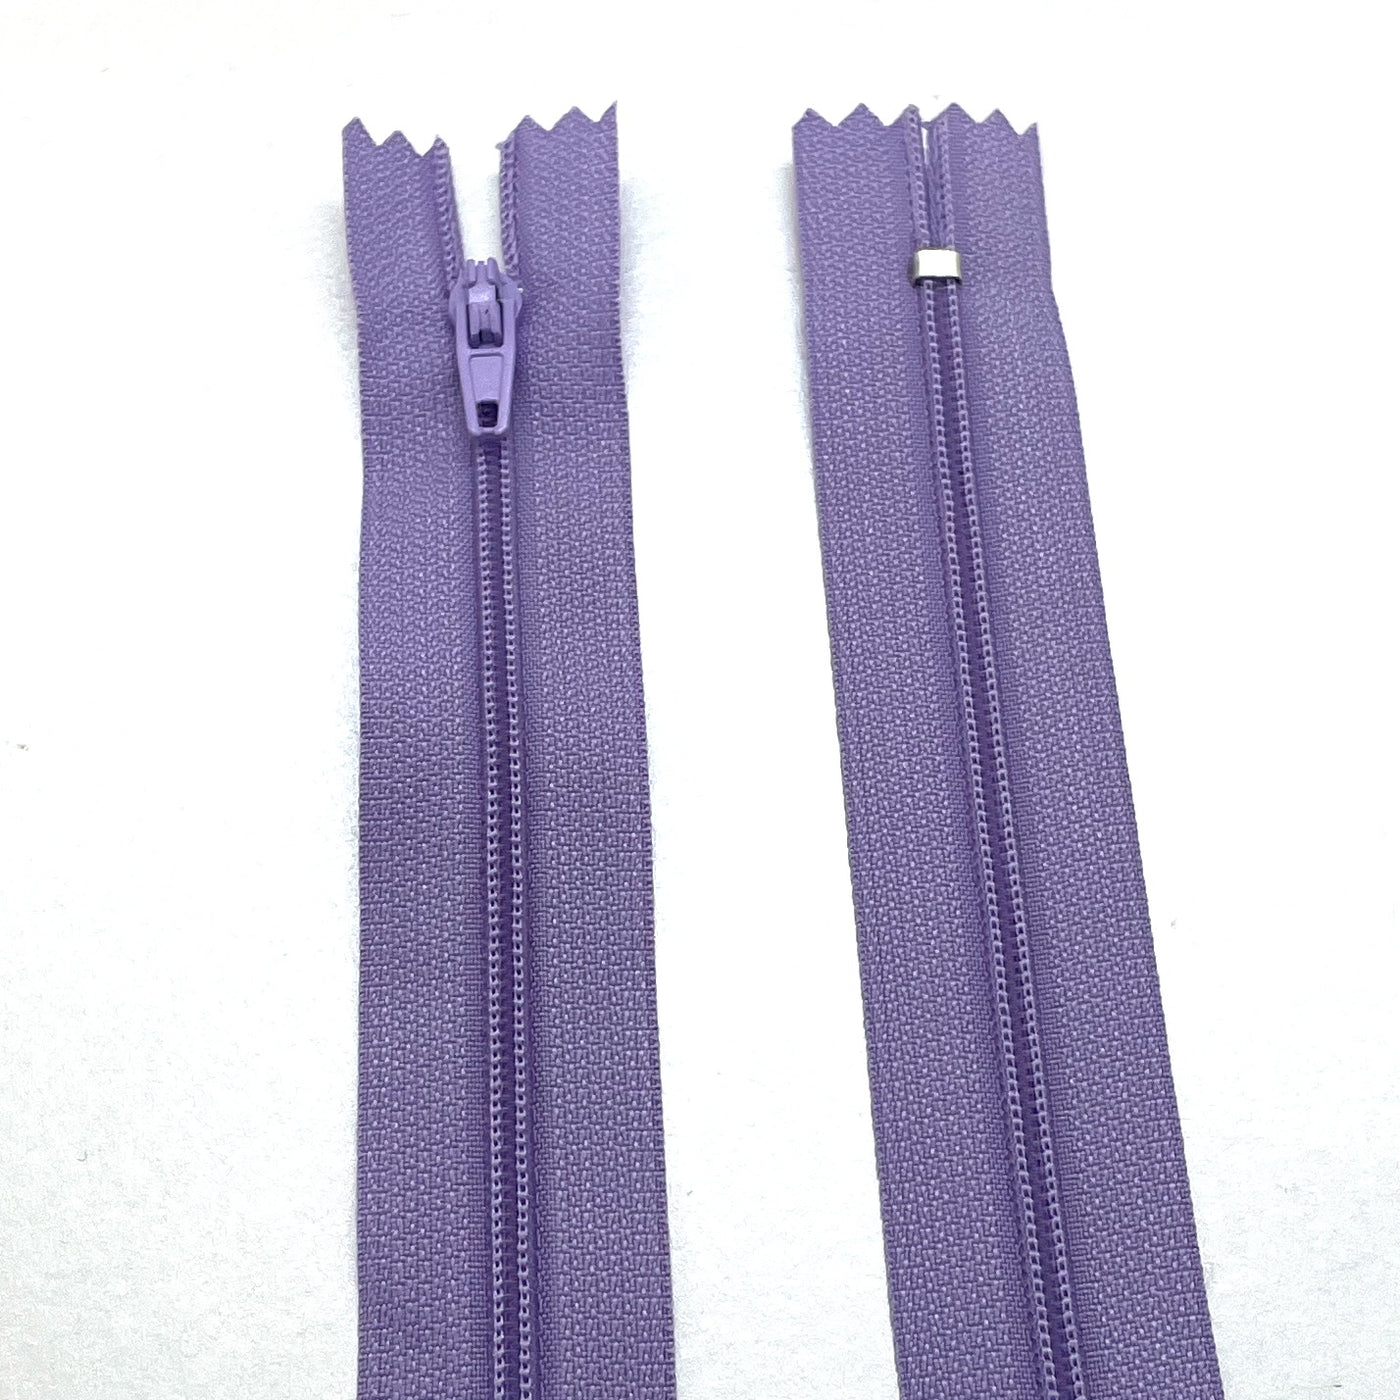 Photo of lilac nylon zips available in 25 colors and 5 sizes. Excellent quality zippers for craft and dressmaking purposes. Perfect for dresses, skirts, trousers, bags, purses, cushions, and numerous other projects. So many possibilities, so little time!